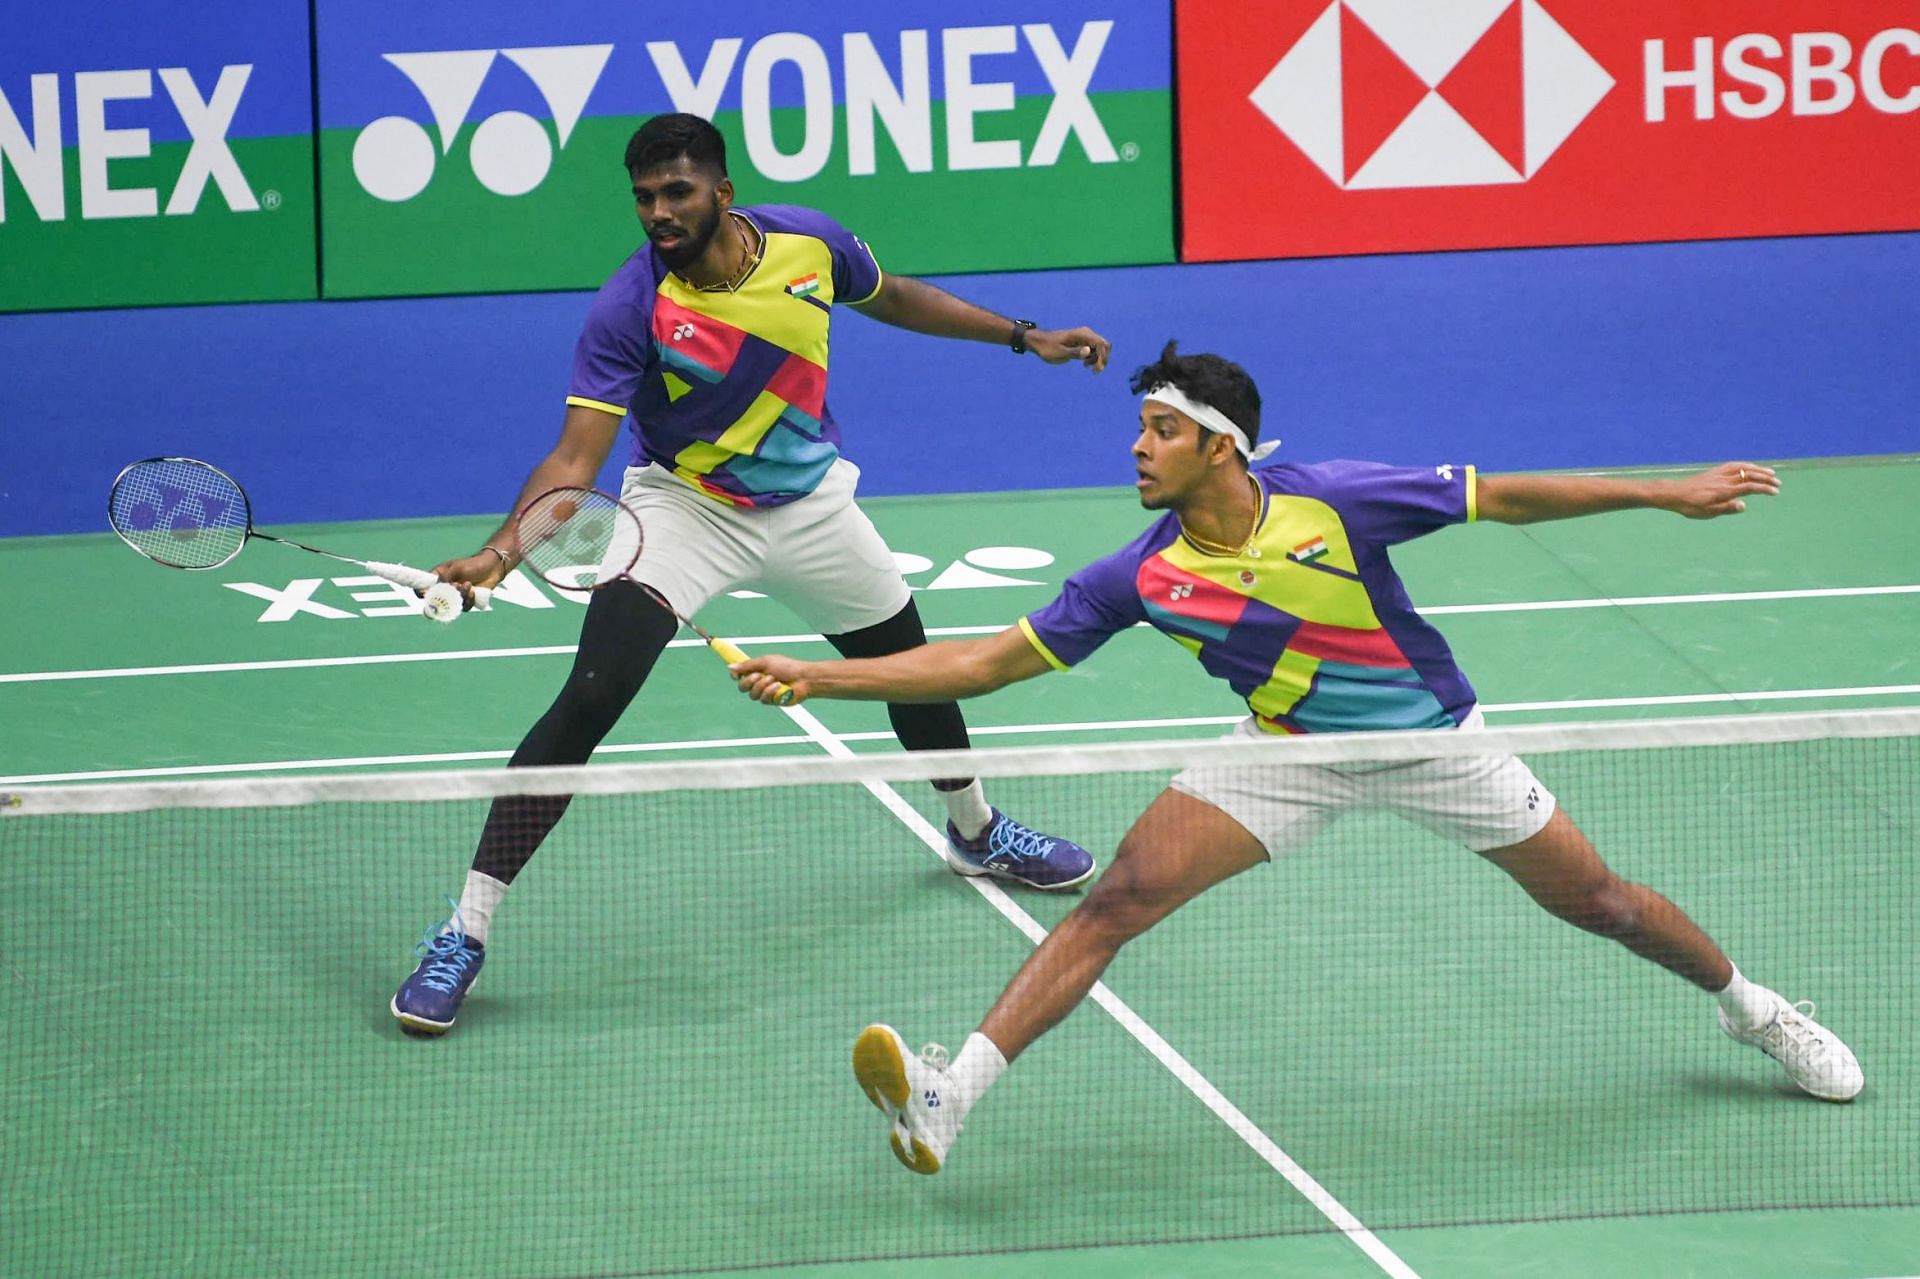 Chirag Shetty (R) and Satwiksairaj Rankireddy, who won silver in the individual men&rsquo;s doubles event at the 2018 Gold Coast Commonwealth Games, are looking to go one better in Birmingham. (Pic credits: BAI)